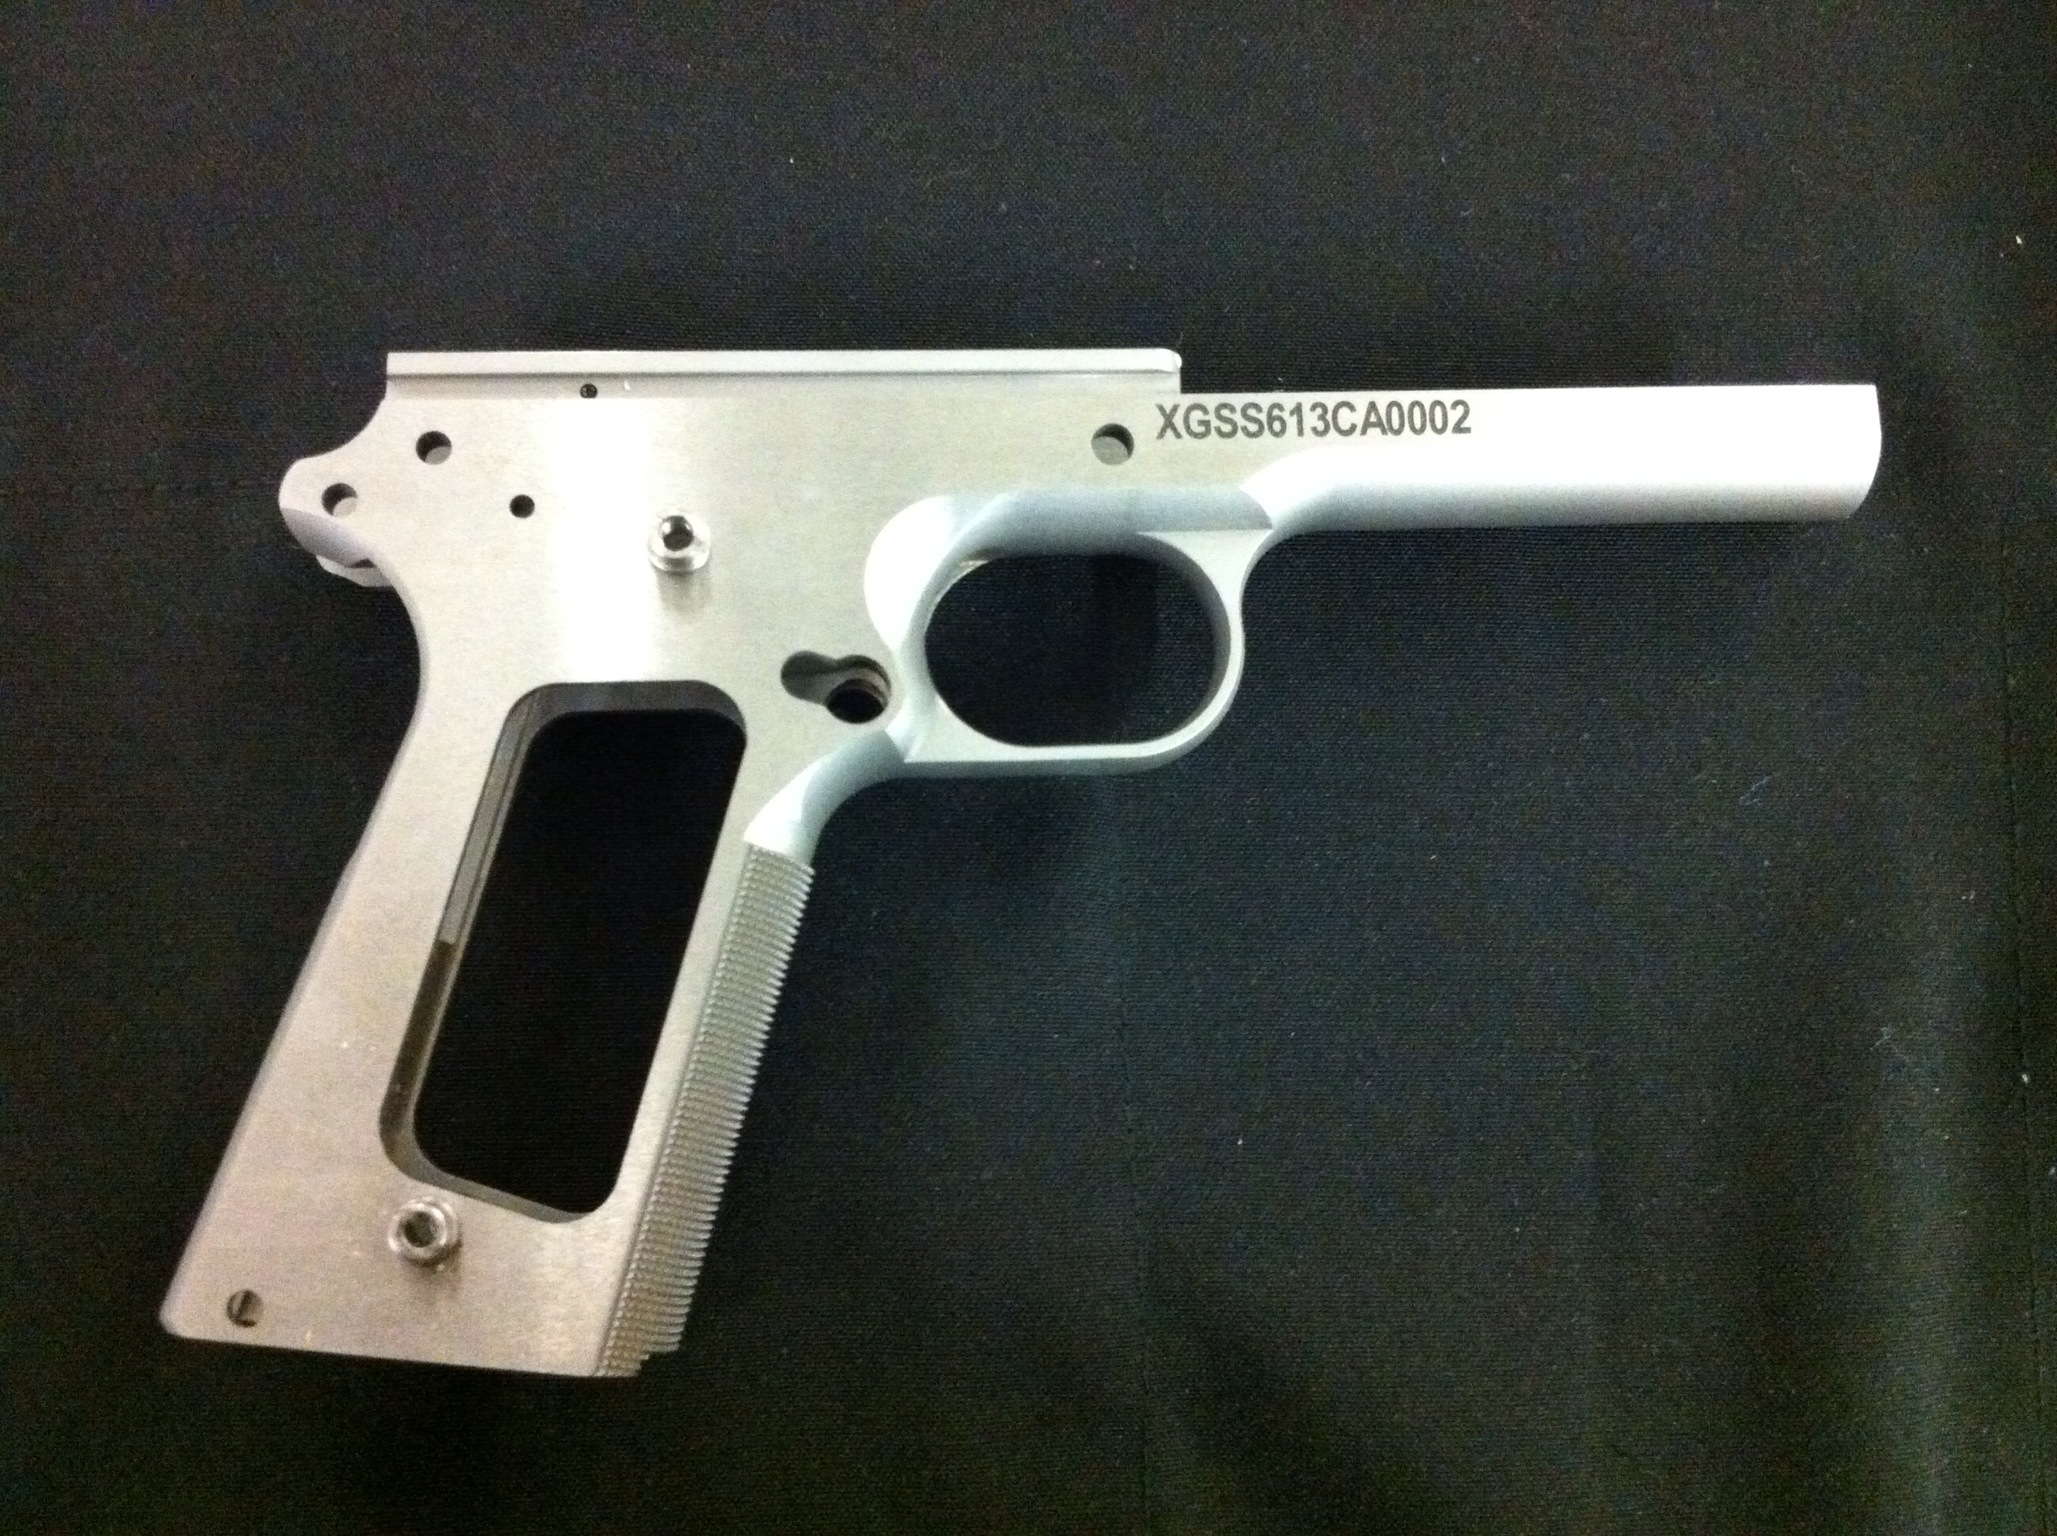 Xtreme Gun 1911 6" Forged Stainless Frame 40 SW